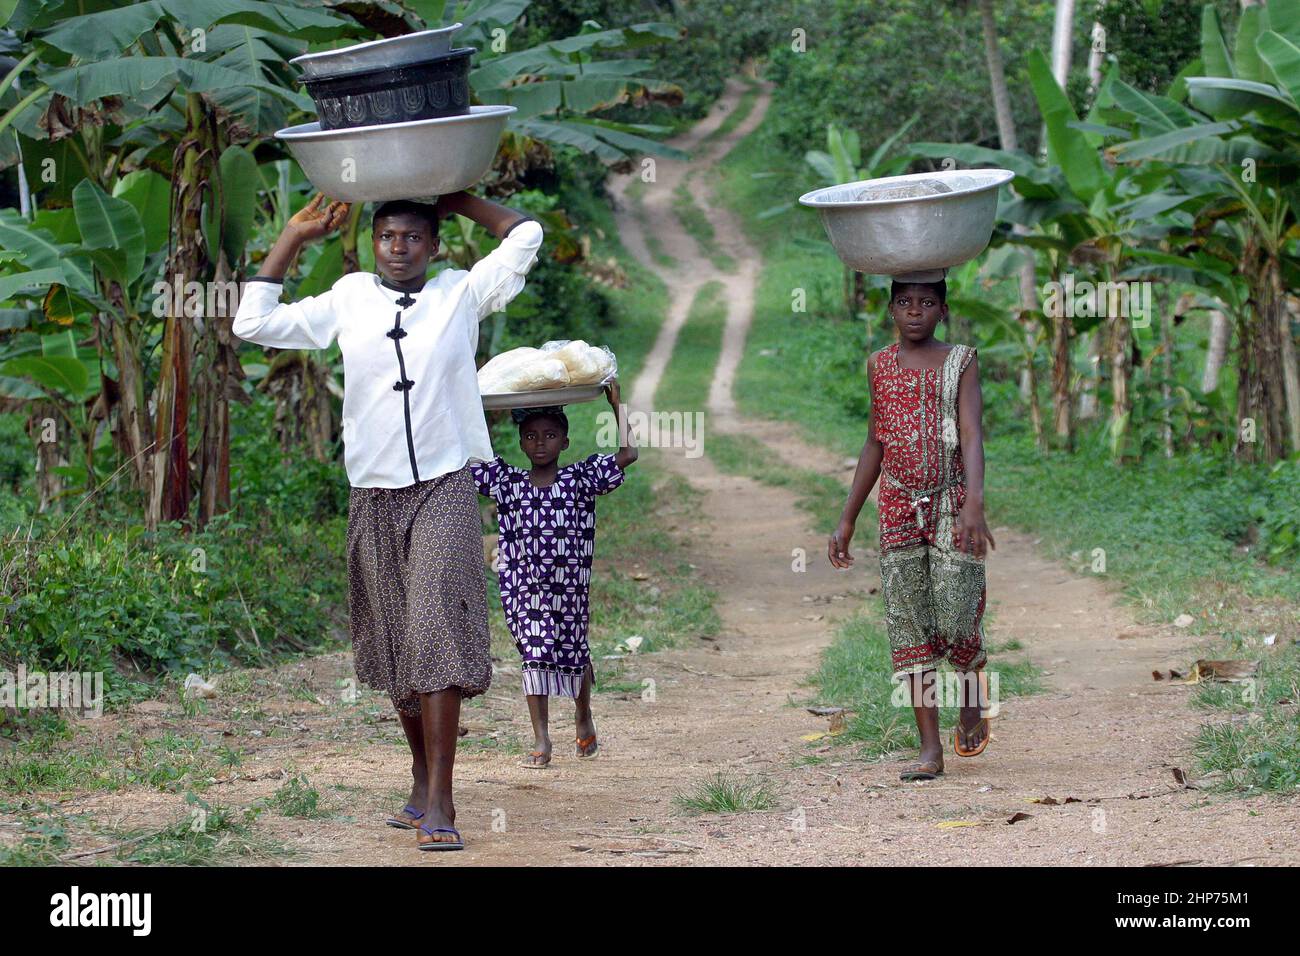 Carrying bowls on head in Ghana Africa Stock Photo